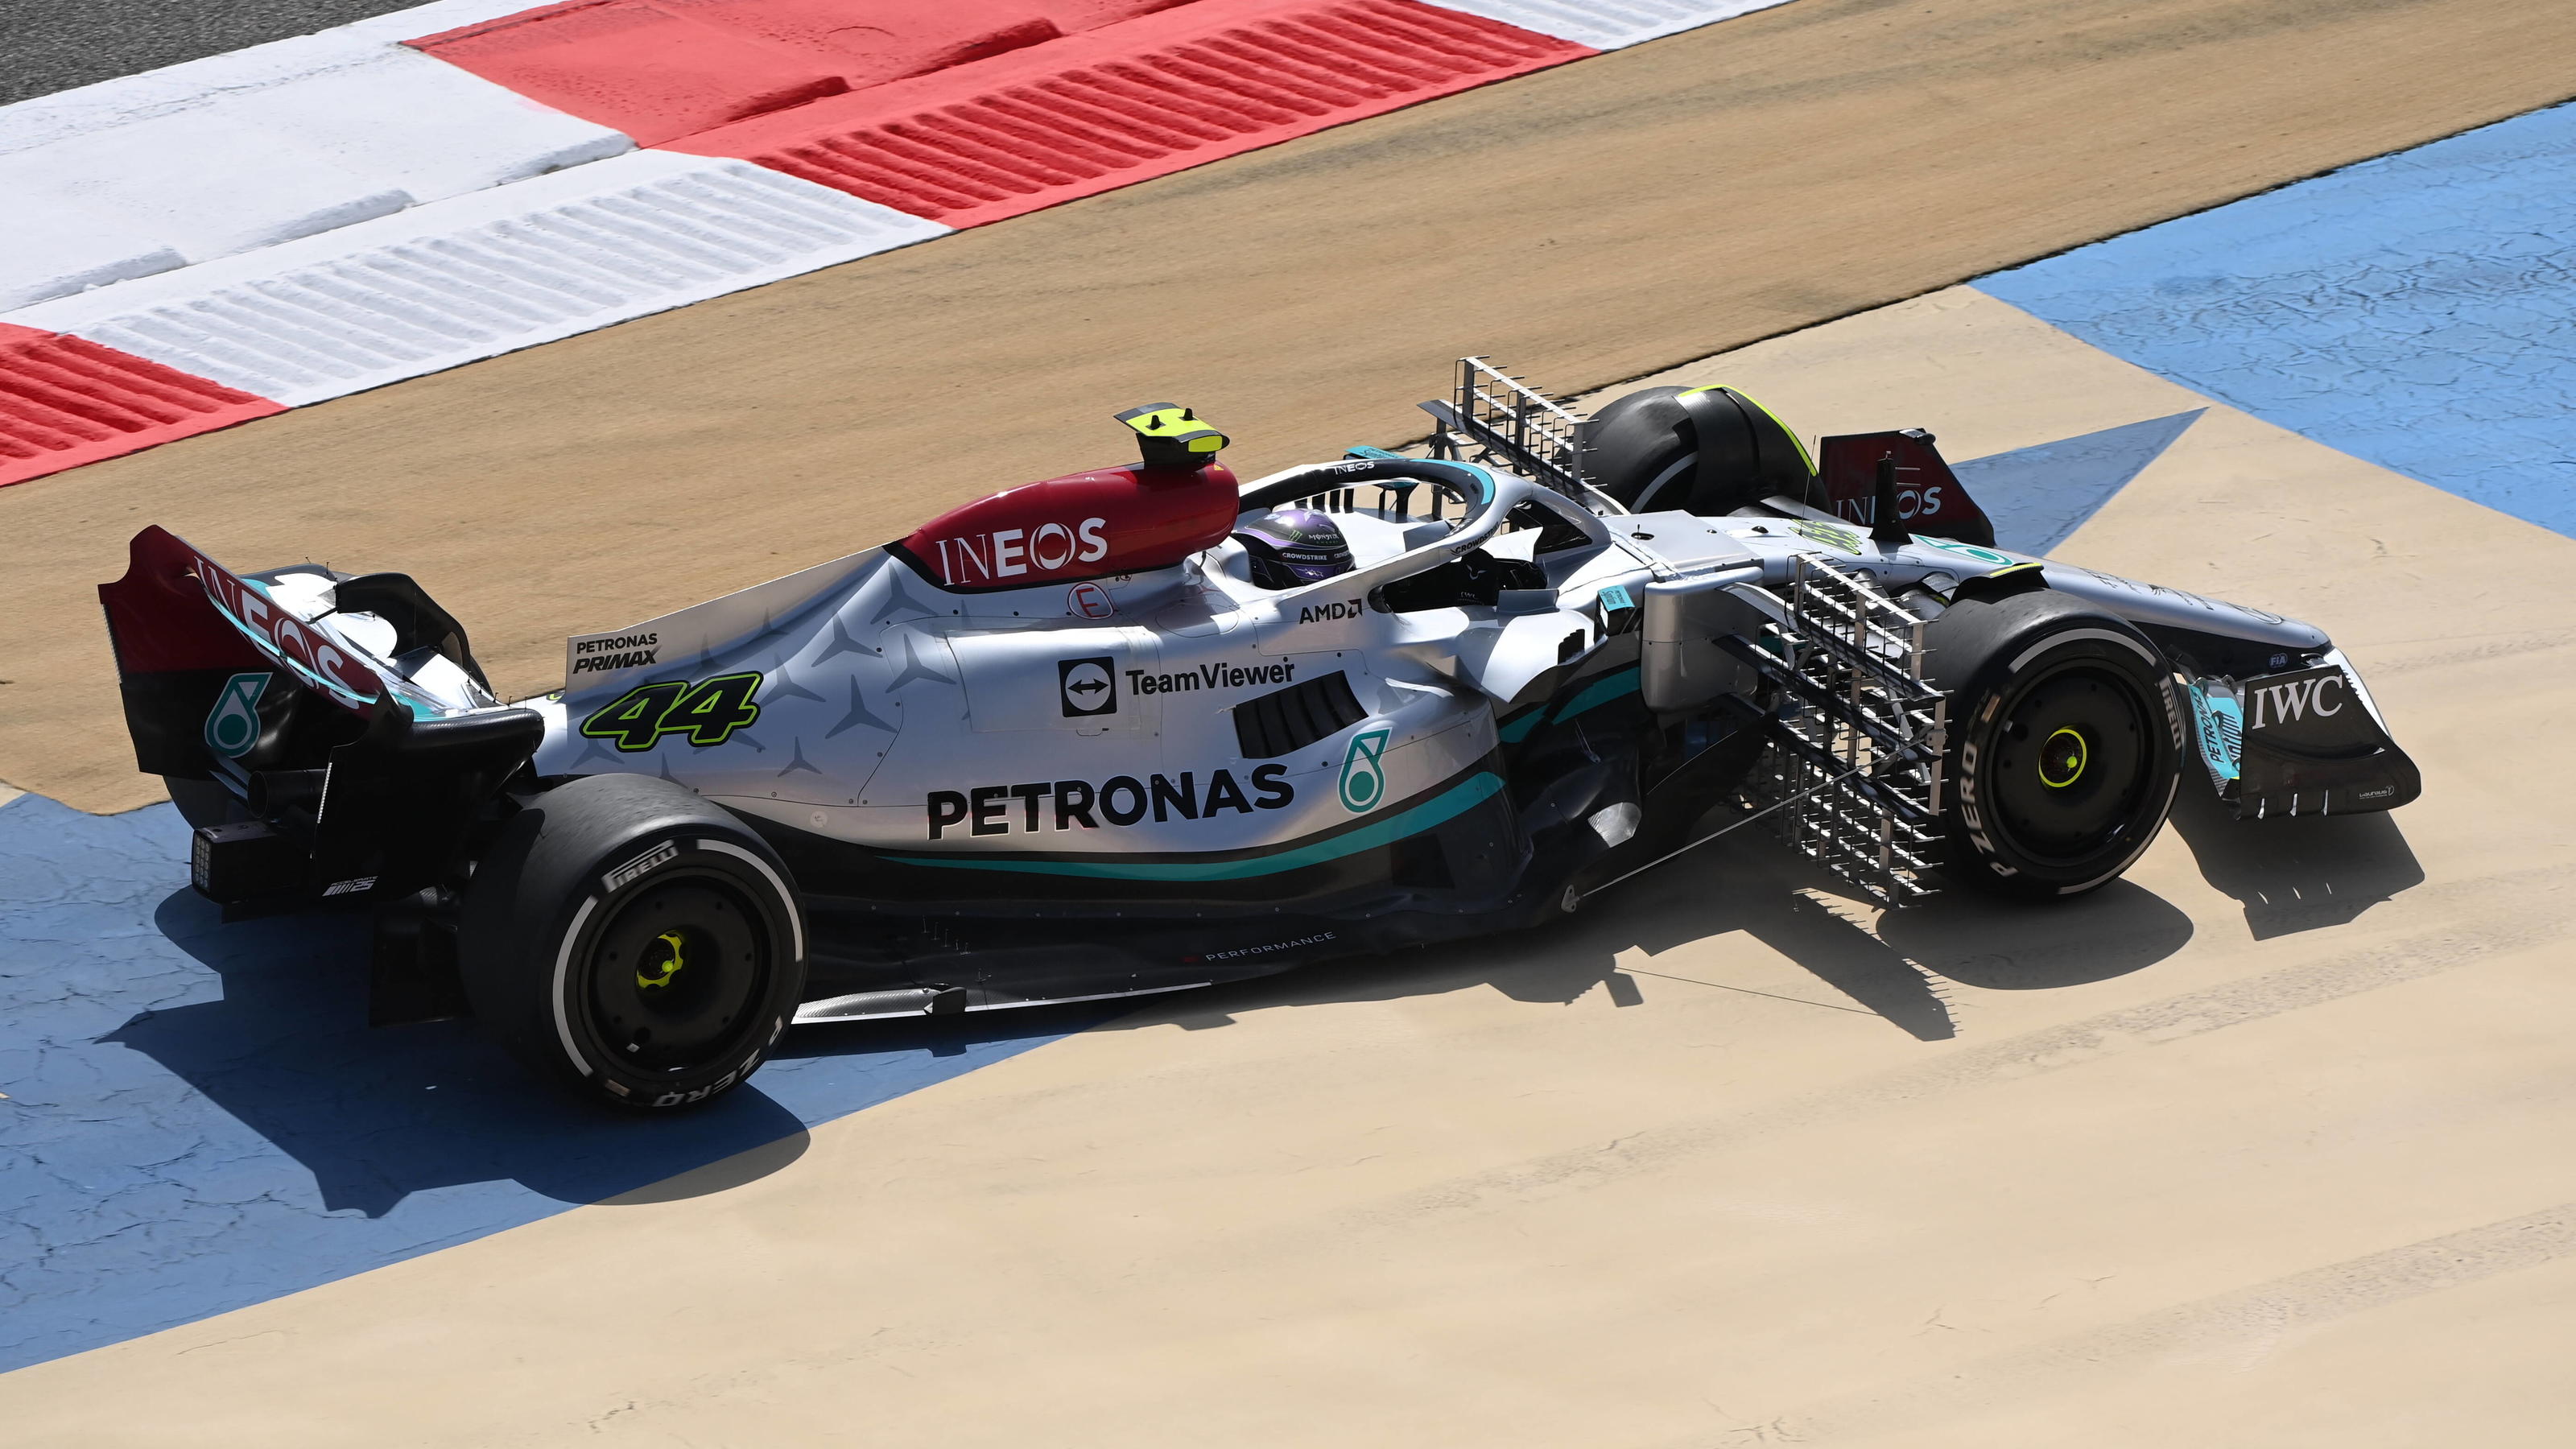  Formula 1 2022: Bahrain March testing BAHRAIN INTERNATIONAL CIRCUIT, BAHRAIN - MARCH 10: Sir Lewis Hamilton, Mercedes W13, with technical equipment fitted during the Bahrain March testing at Bahrain International Circuit on Thursday March 10, 2022 i